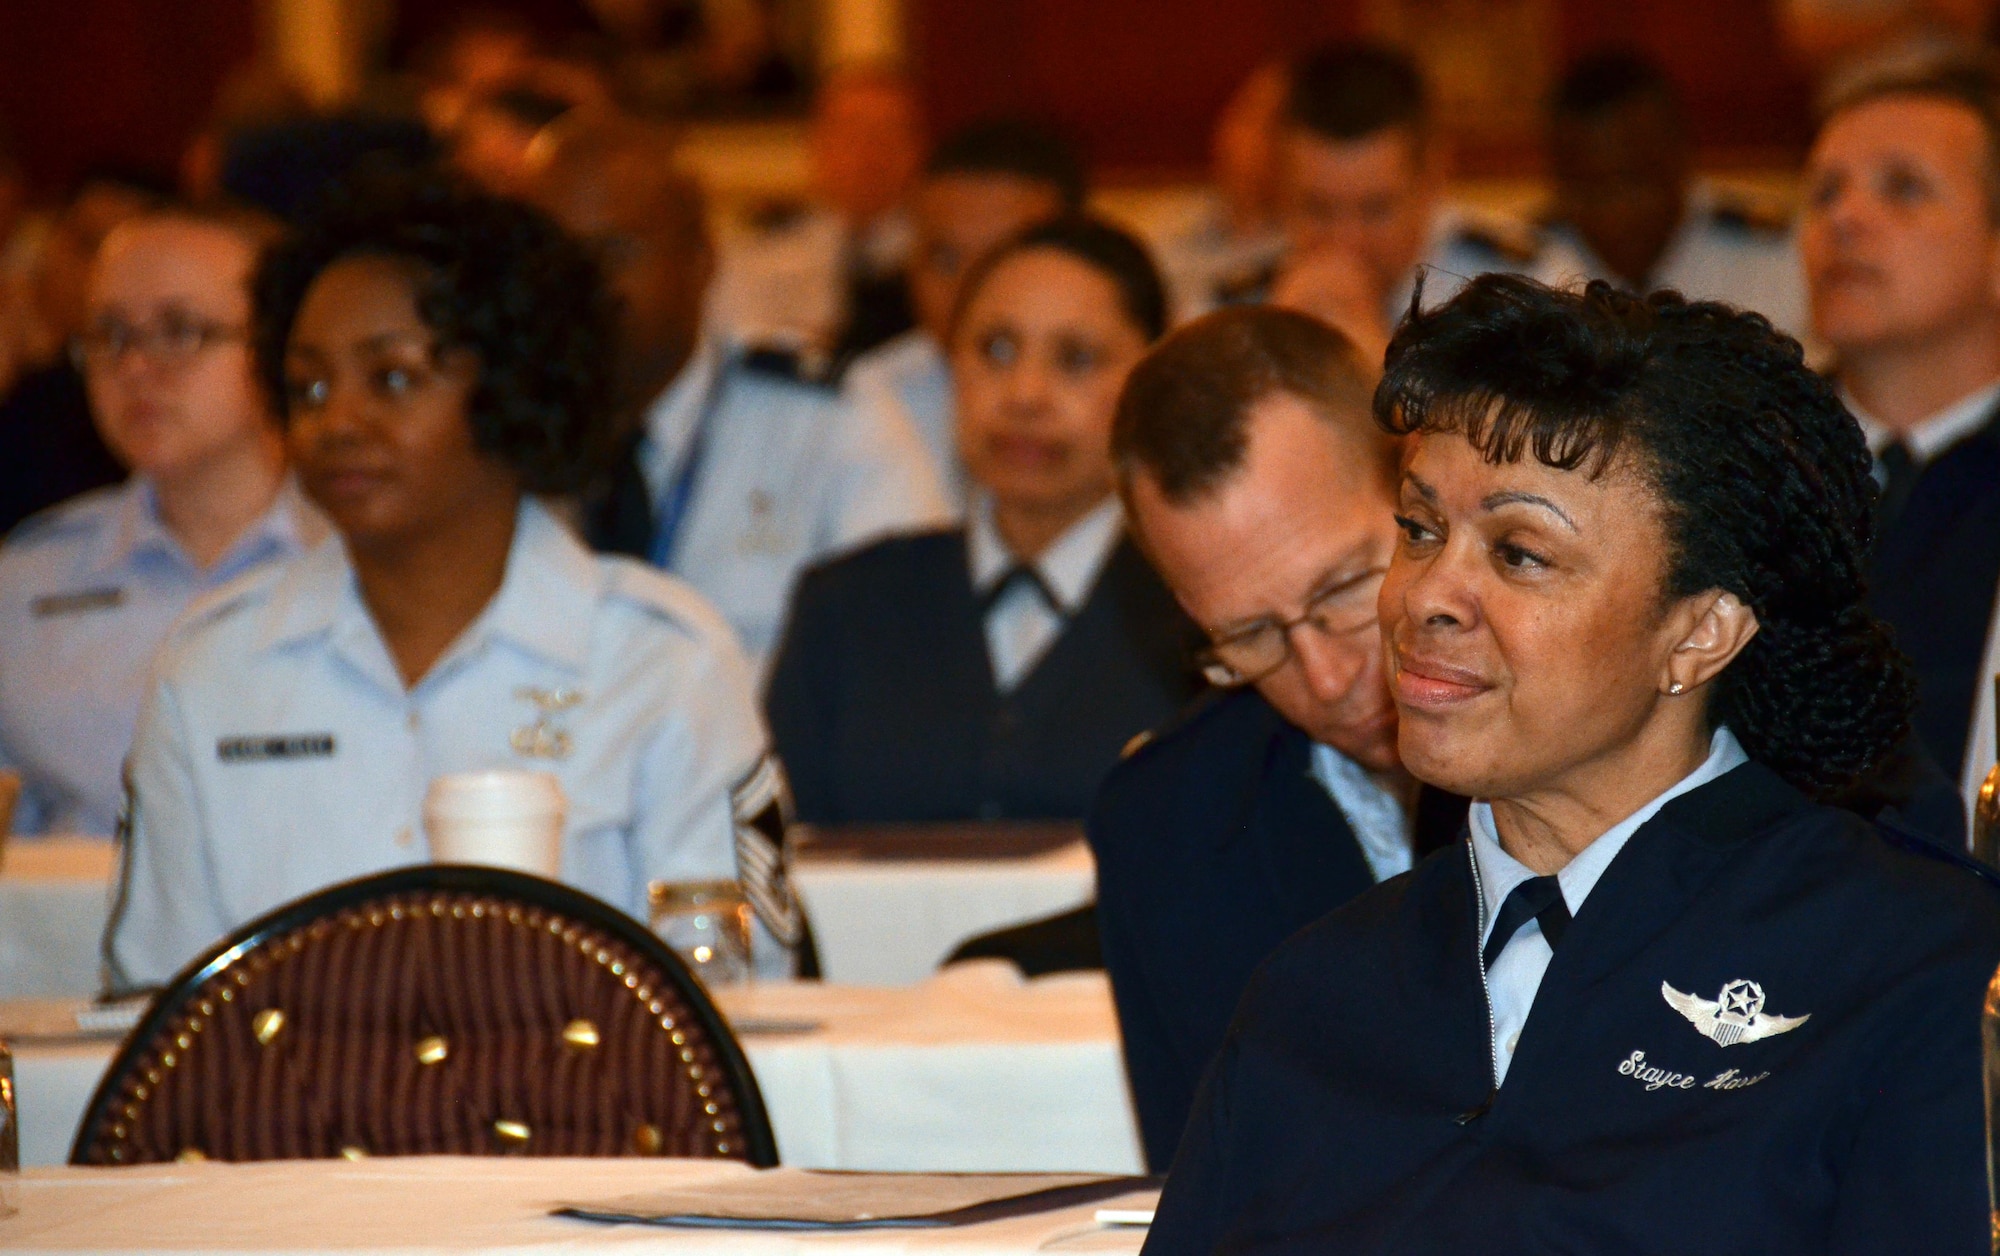 Over 270 Air Force Reserve Chaplain's and Chaplain Assistants were in attendance of the 2016 Air Force Reserve Chaplain Corps Conference held in Chicago, IL, April 2016. Over 20-hours of training was accomplished with guest speakers who specialize in Moral Injury and Soul Care. (U.S. Air Force photo/Tech. Sgt. Kelly Goonan)